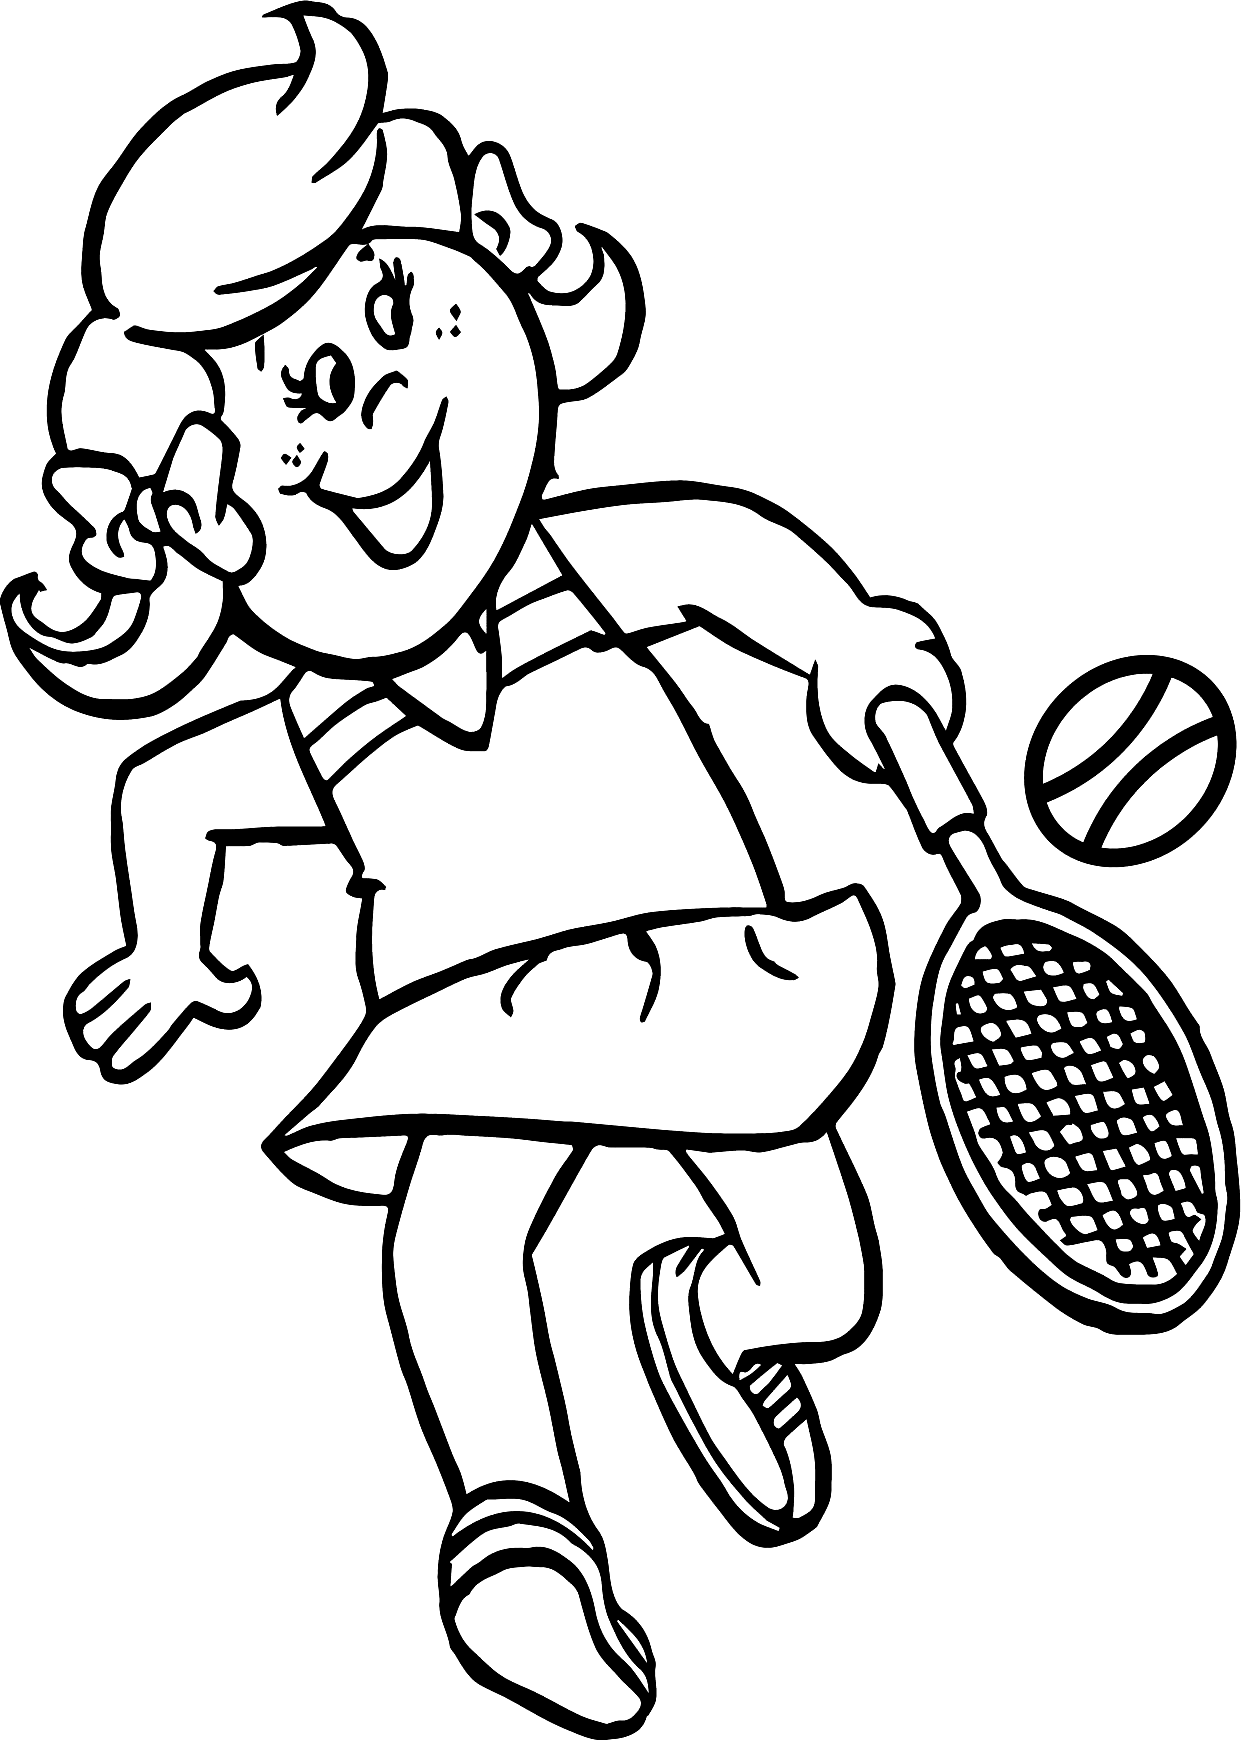 Kid Playing Tennis Coloring Pages